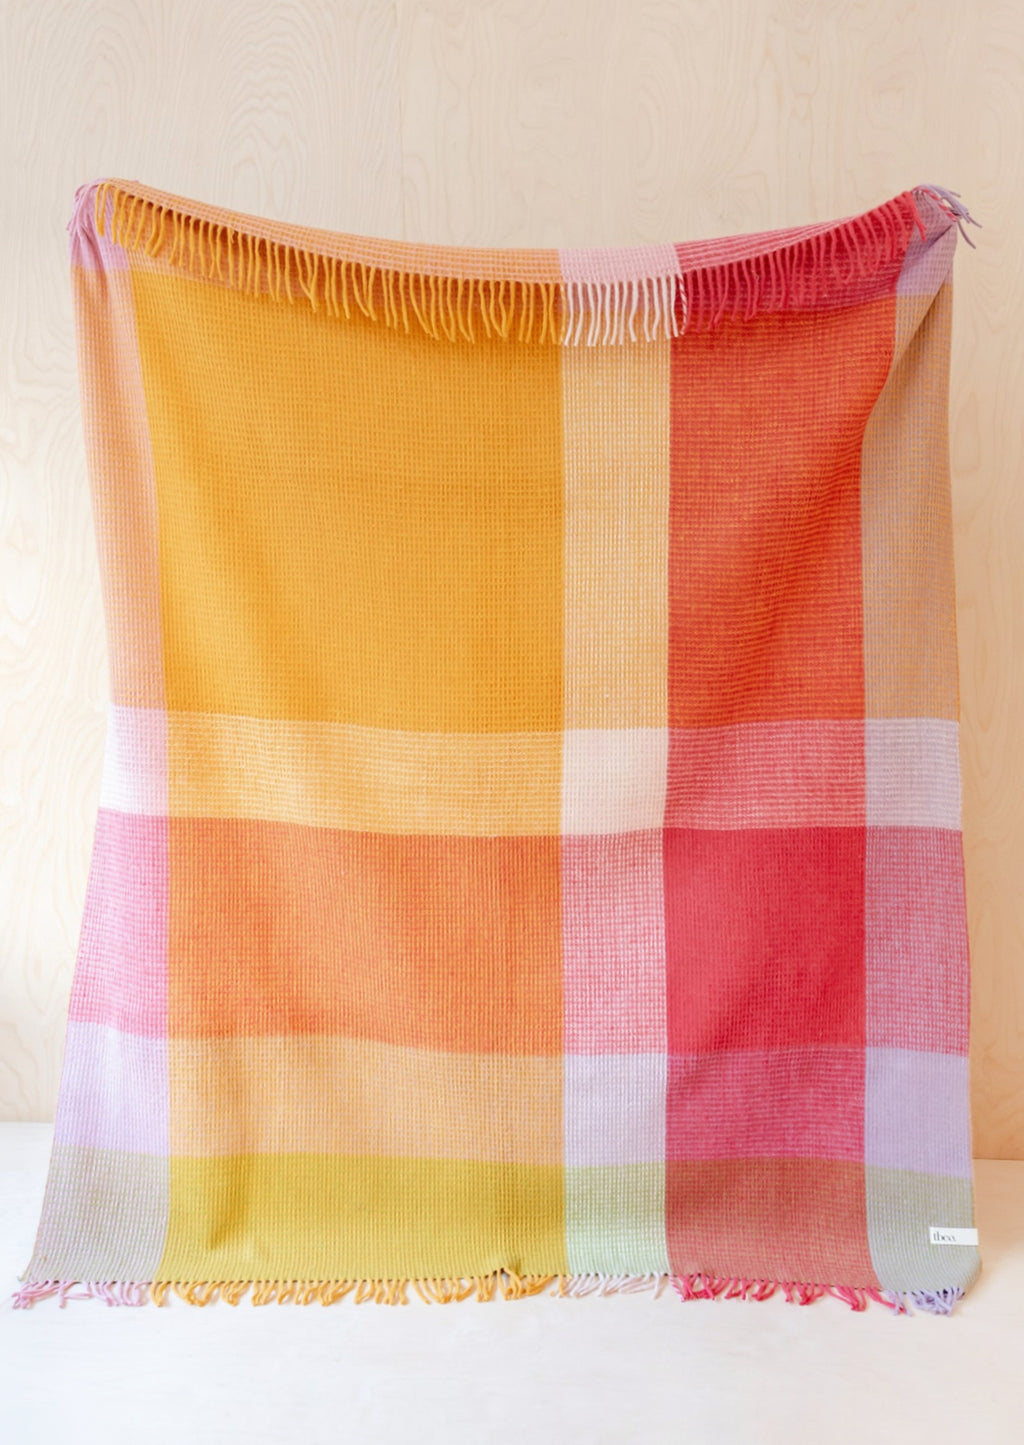 Orange Juice Multi: A colorblock large check patterned throw in magenta, orange, yellow and lavender tones.